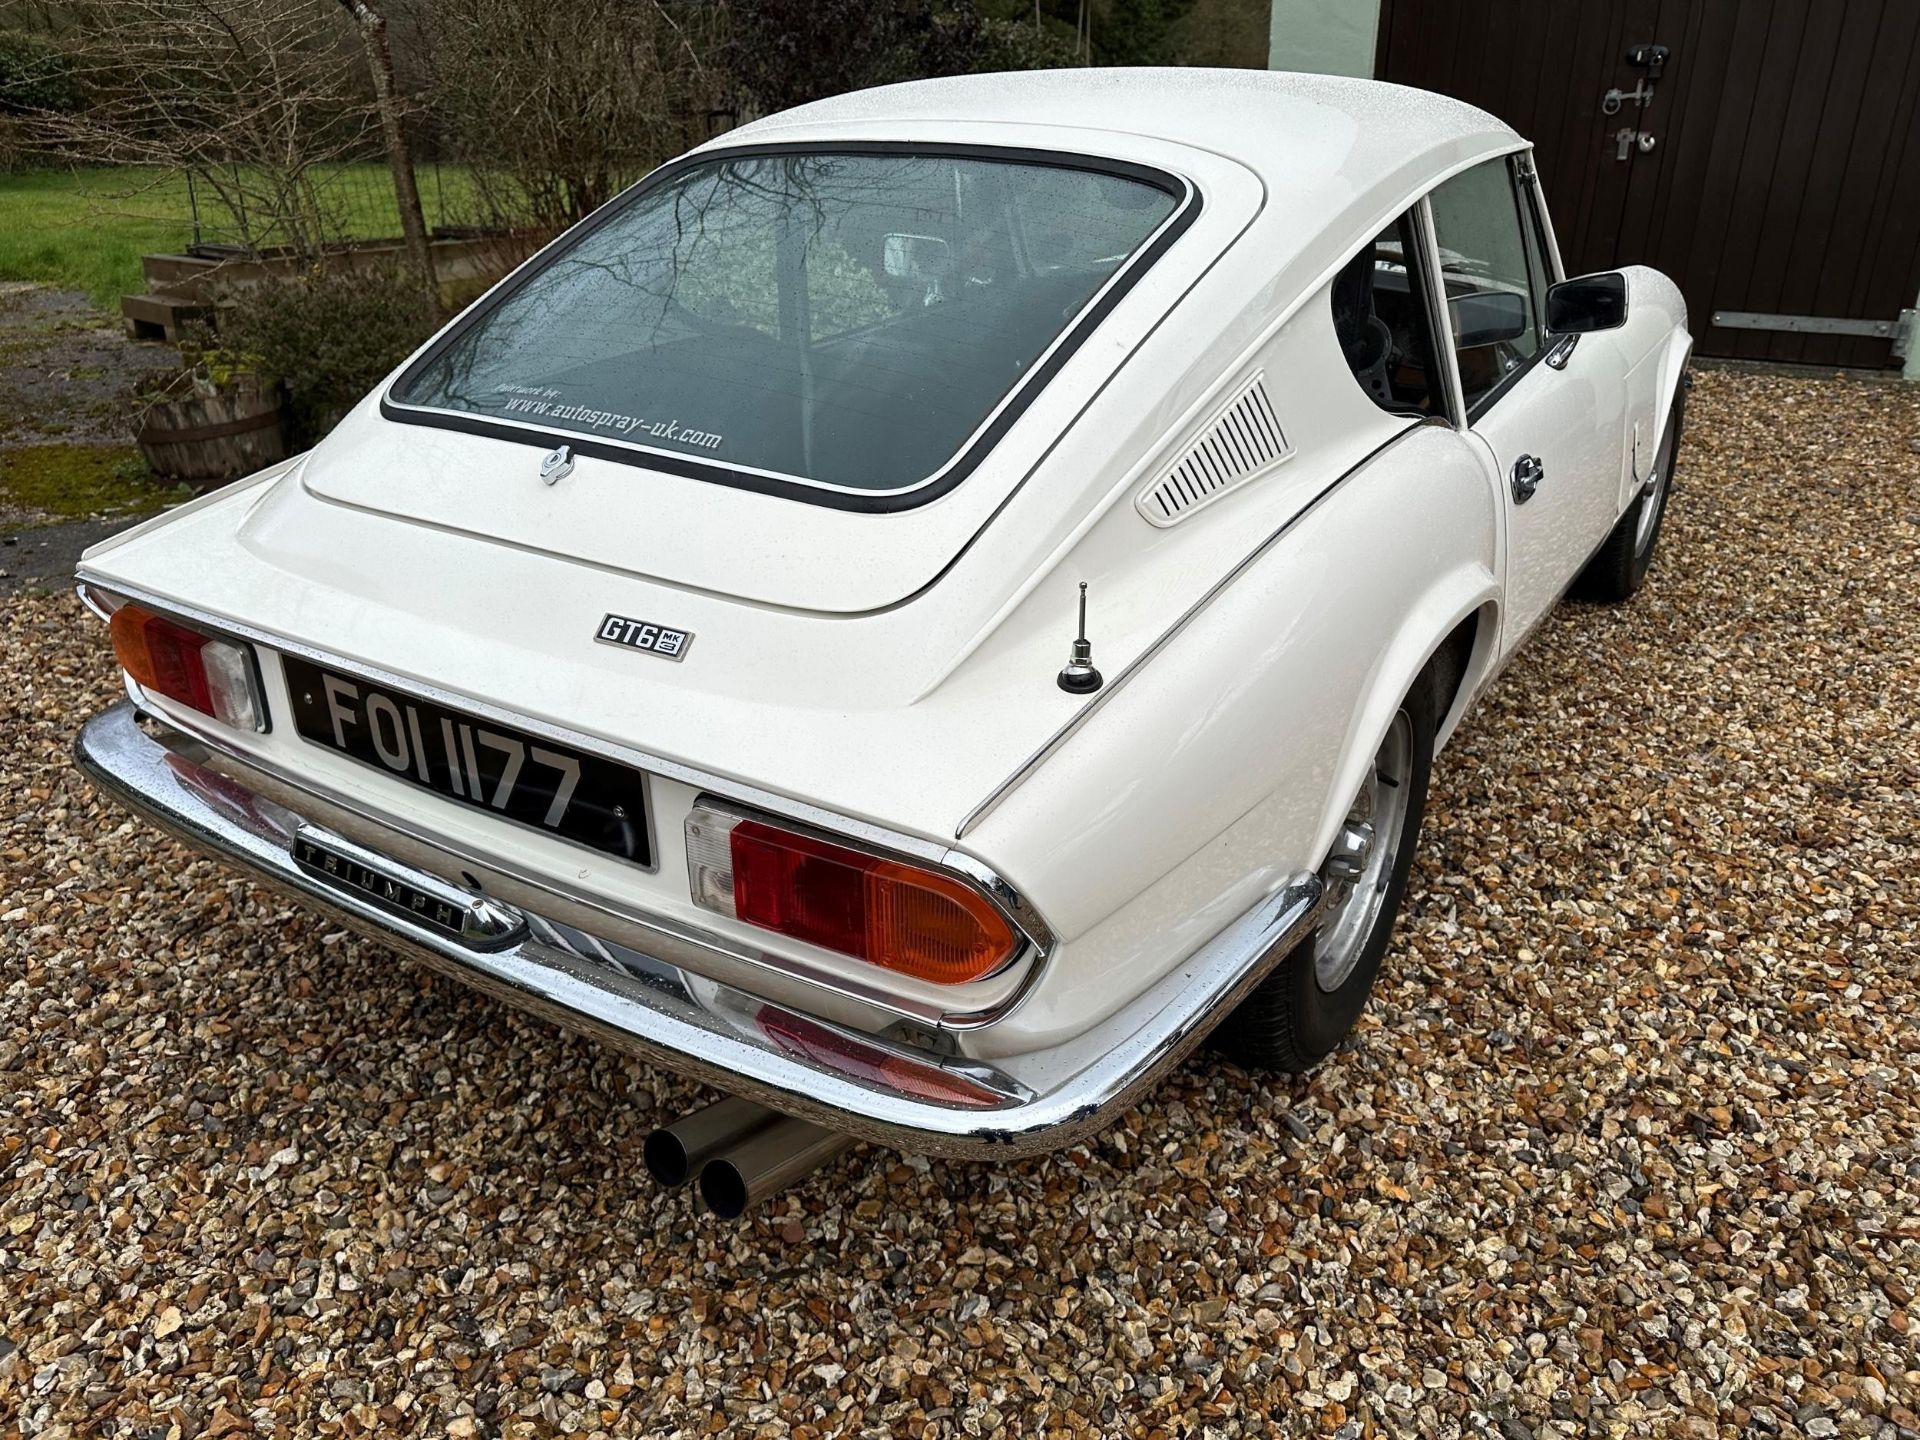 1973 Triumph GT6 Registration number FOI 1177 Chassis number KE145270 Engine number 24517 White with - Image 2 of 34